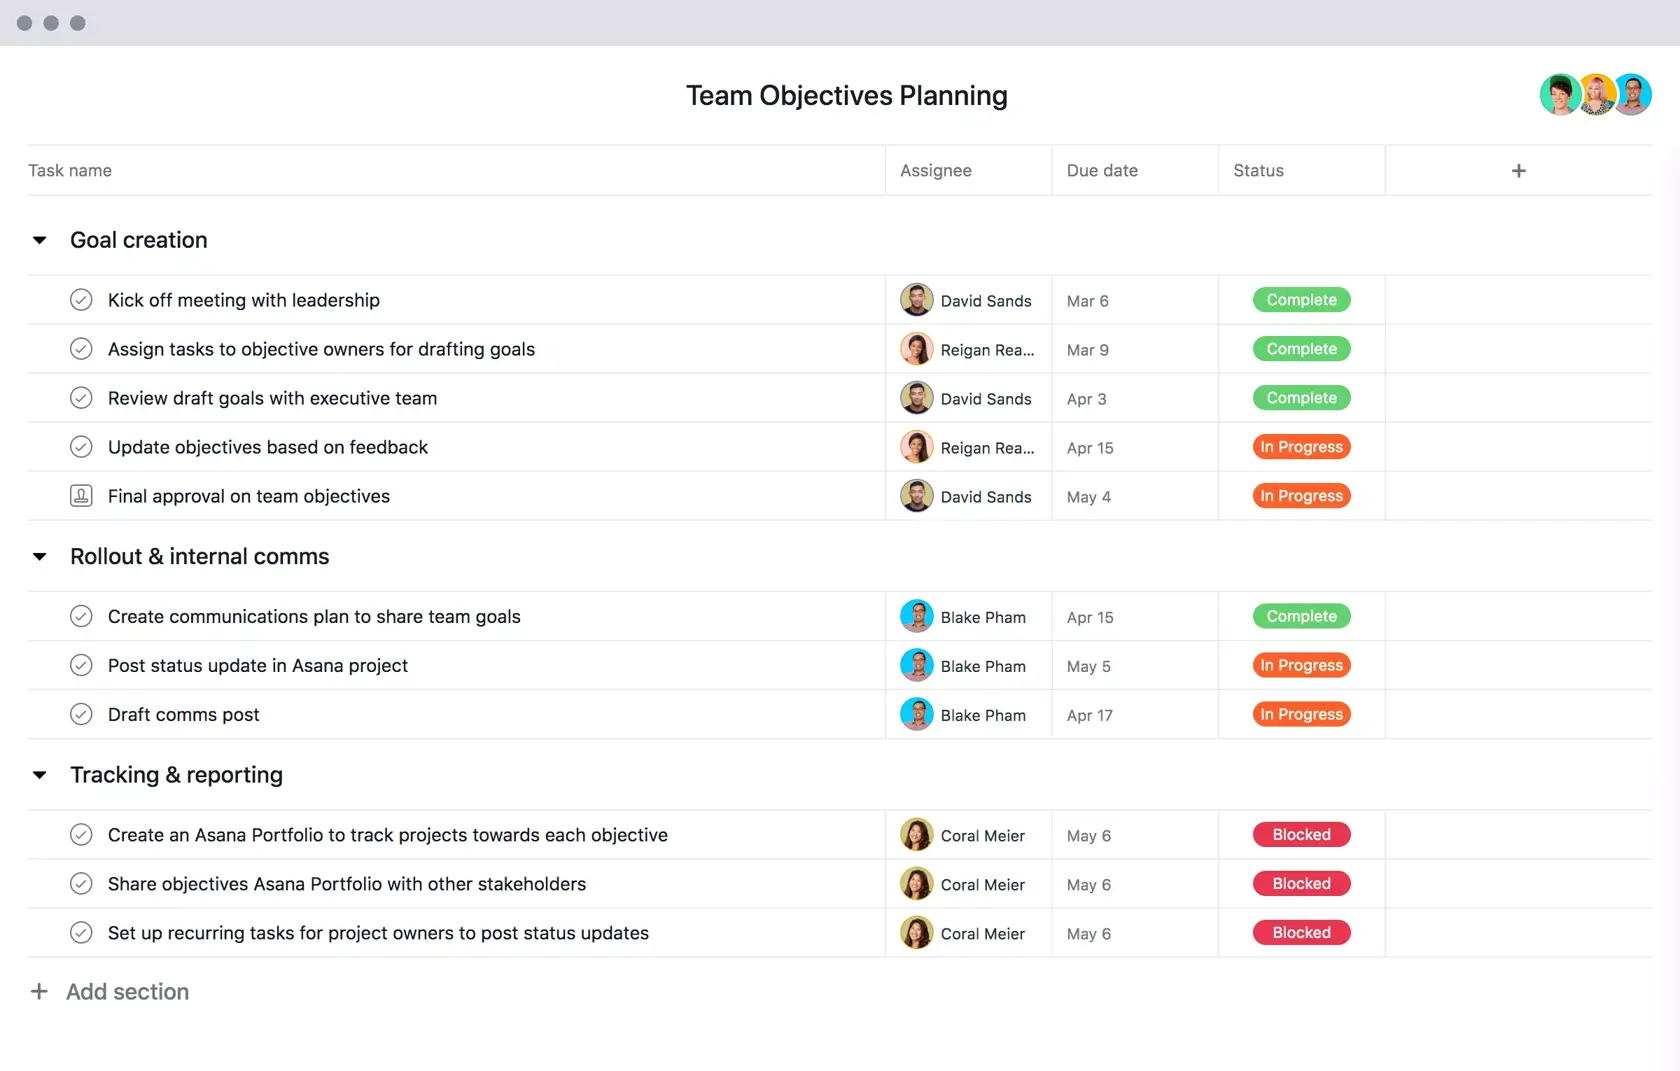 [Old product ui] Team goals and objectives planning example in Asana, spreadsheet-style project view (List)